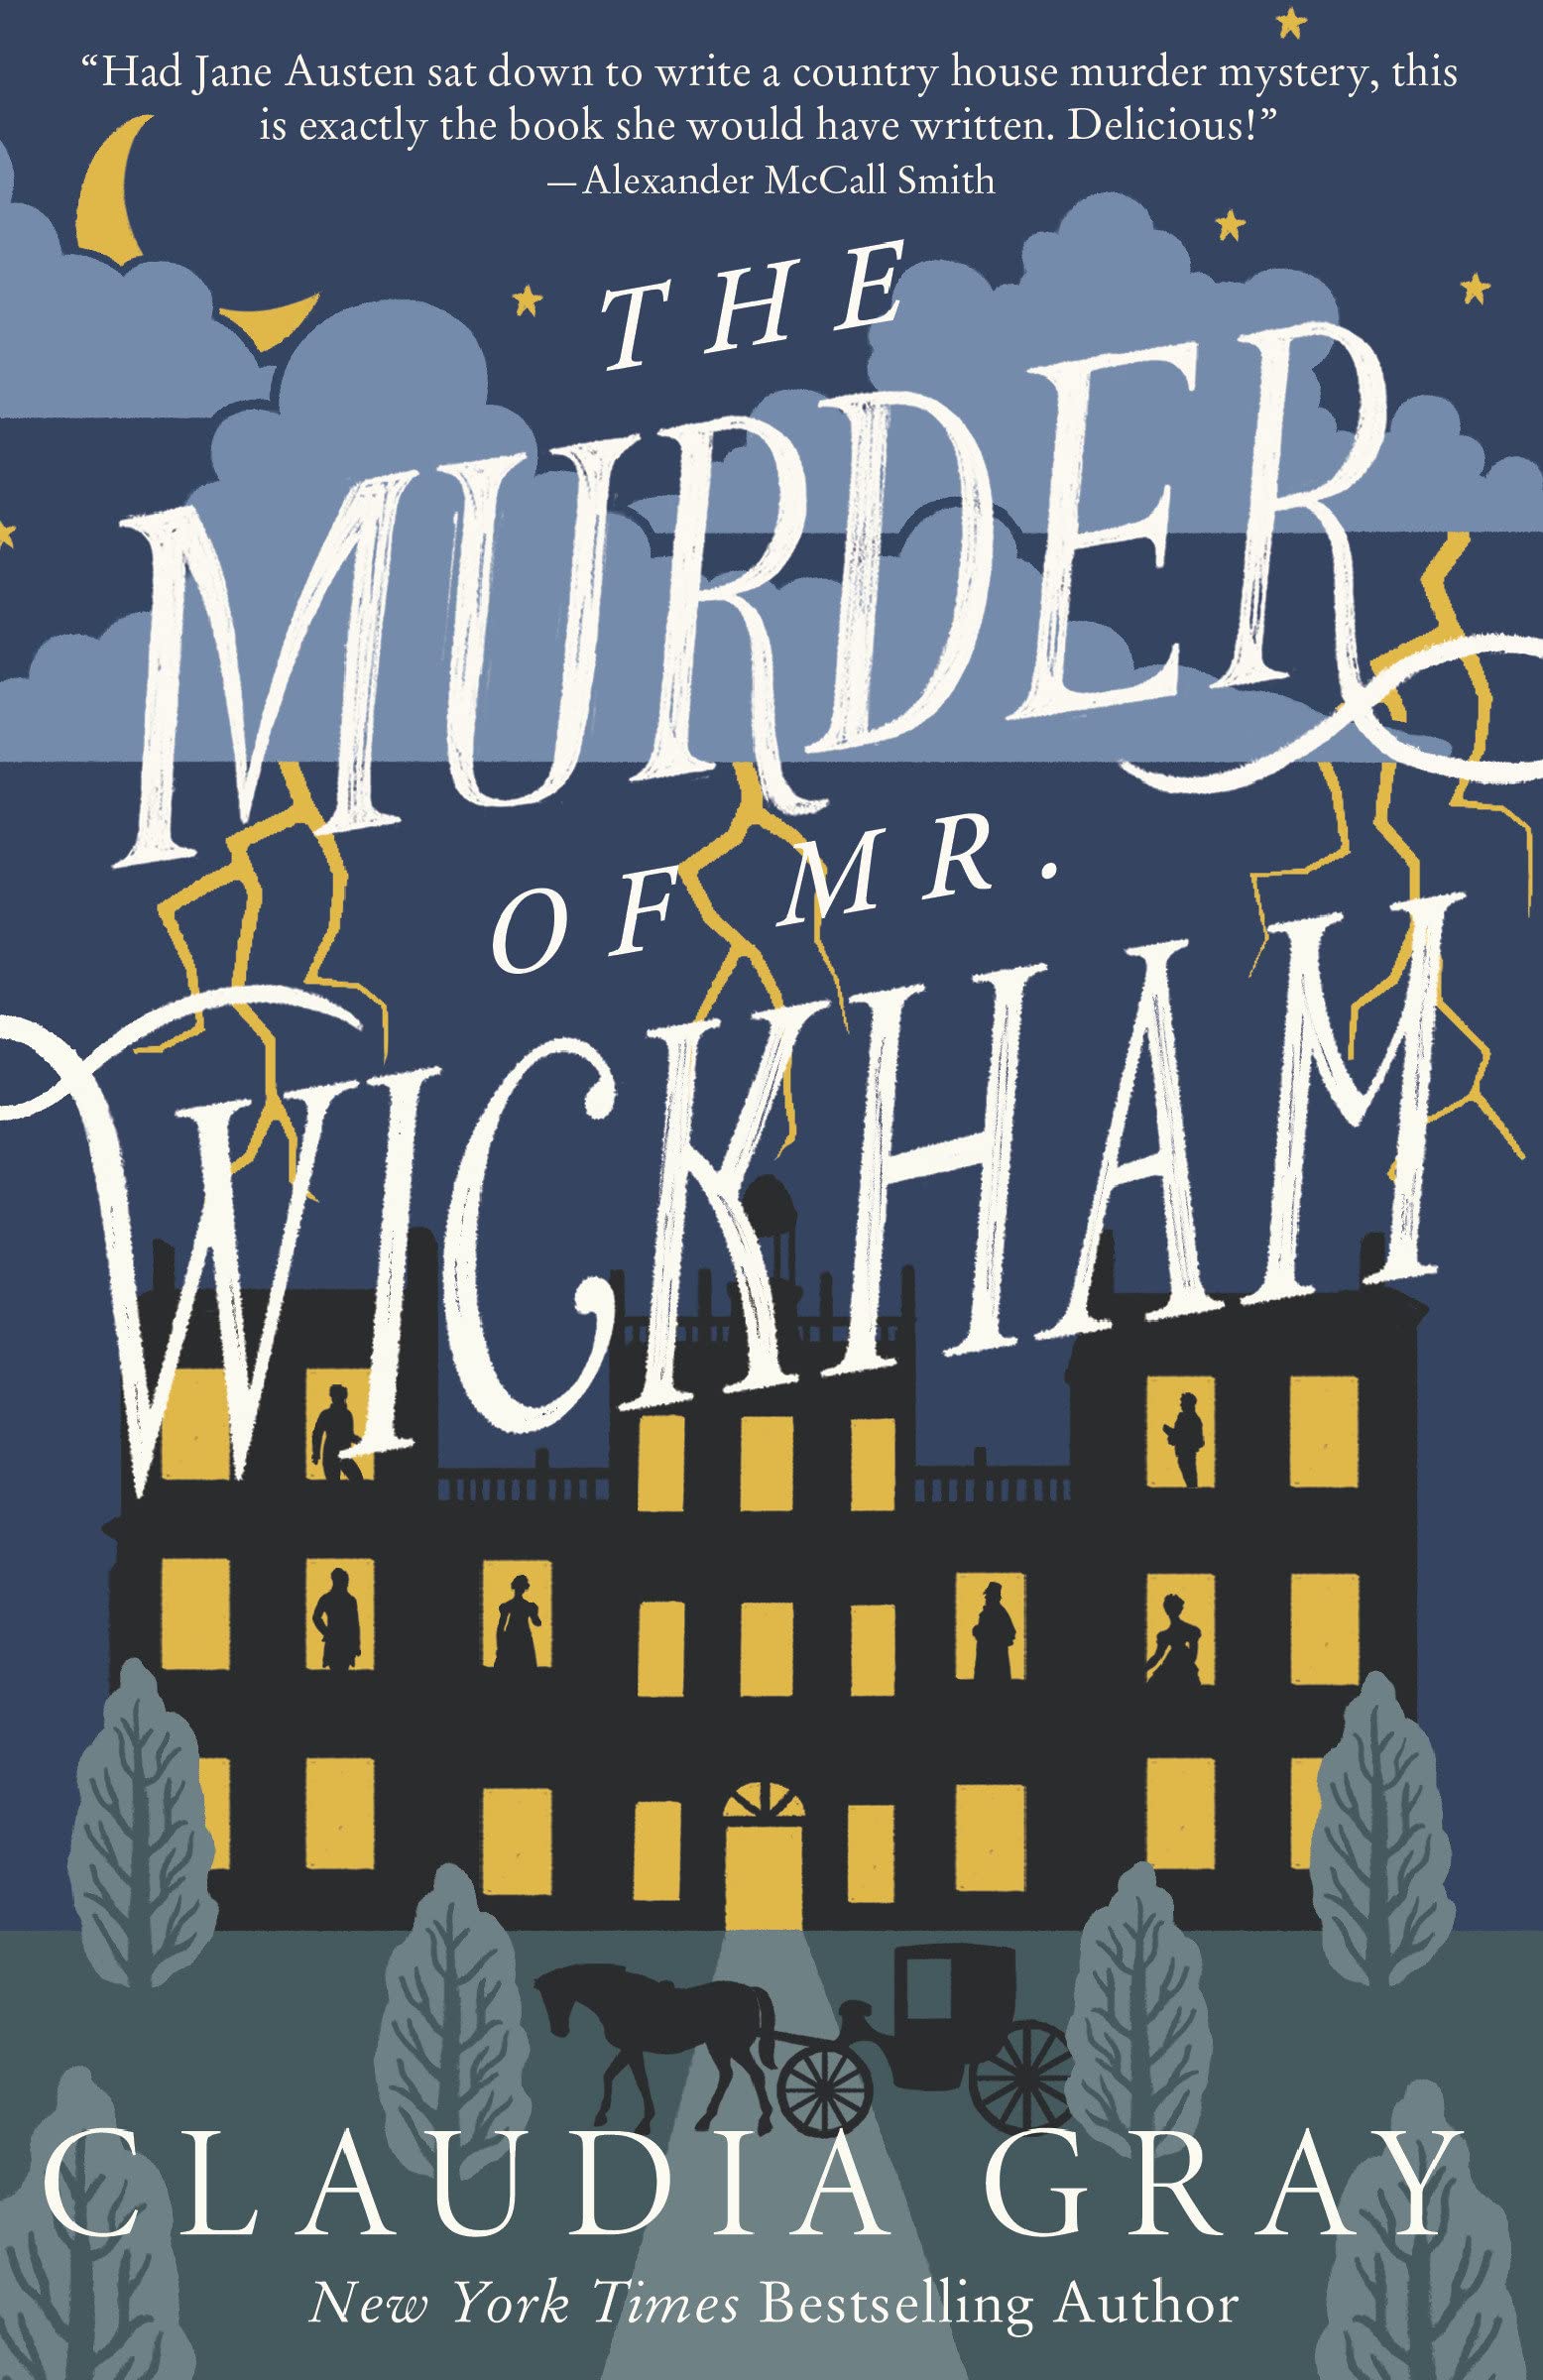 Book cover of The Murder of Mr. Wickham, by Claudia Gray